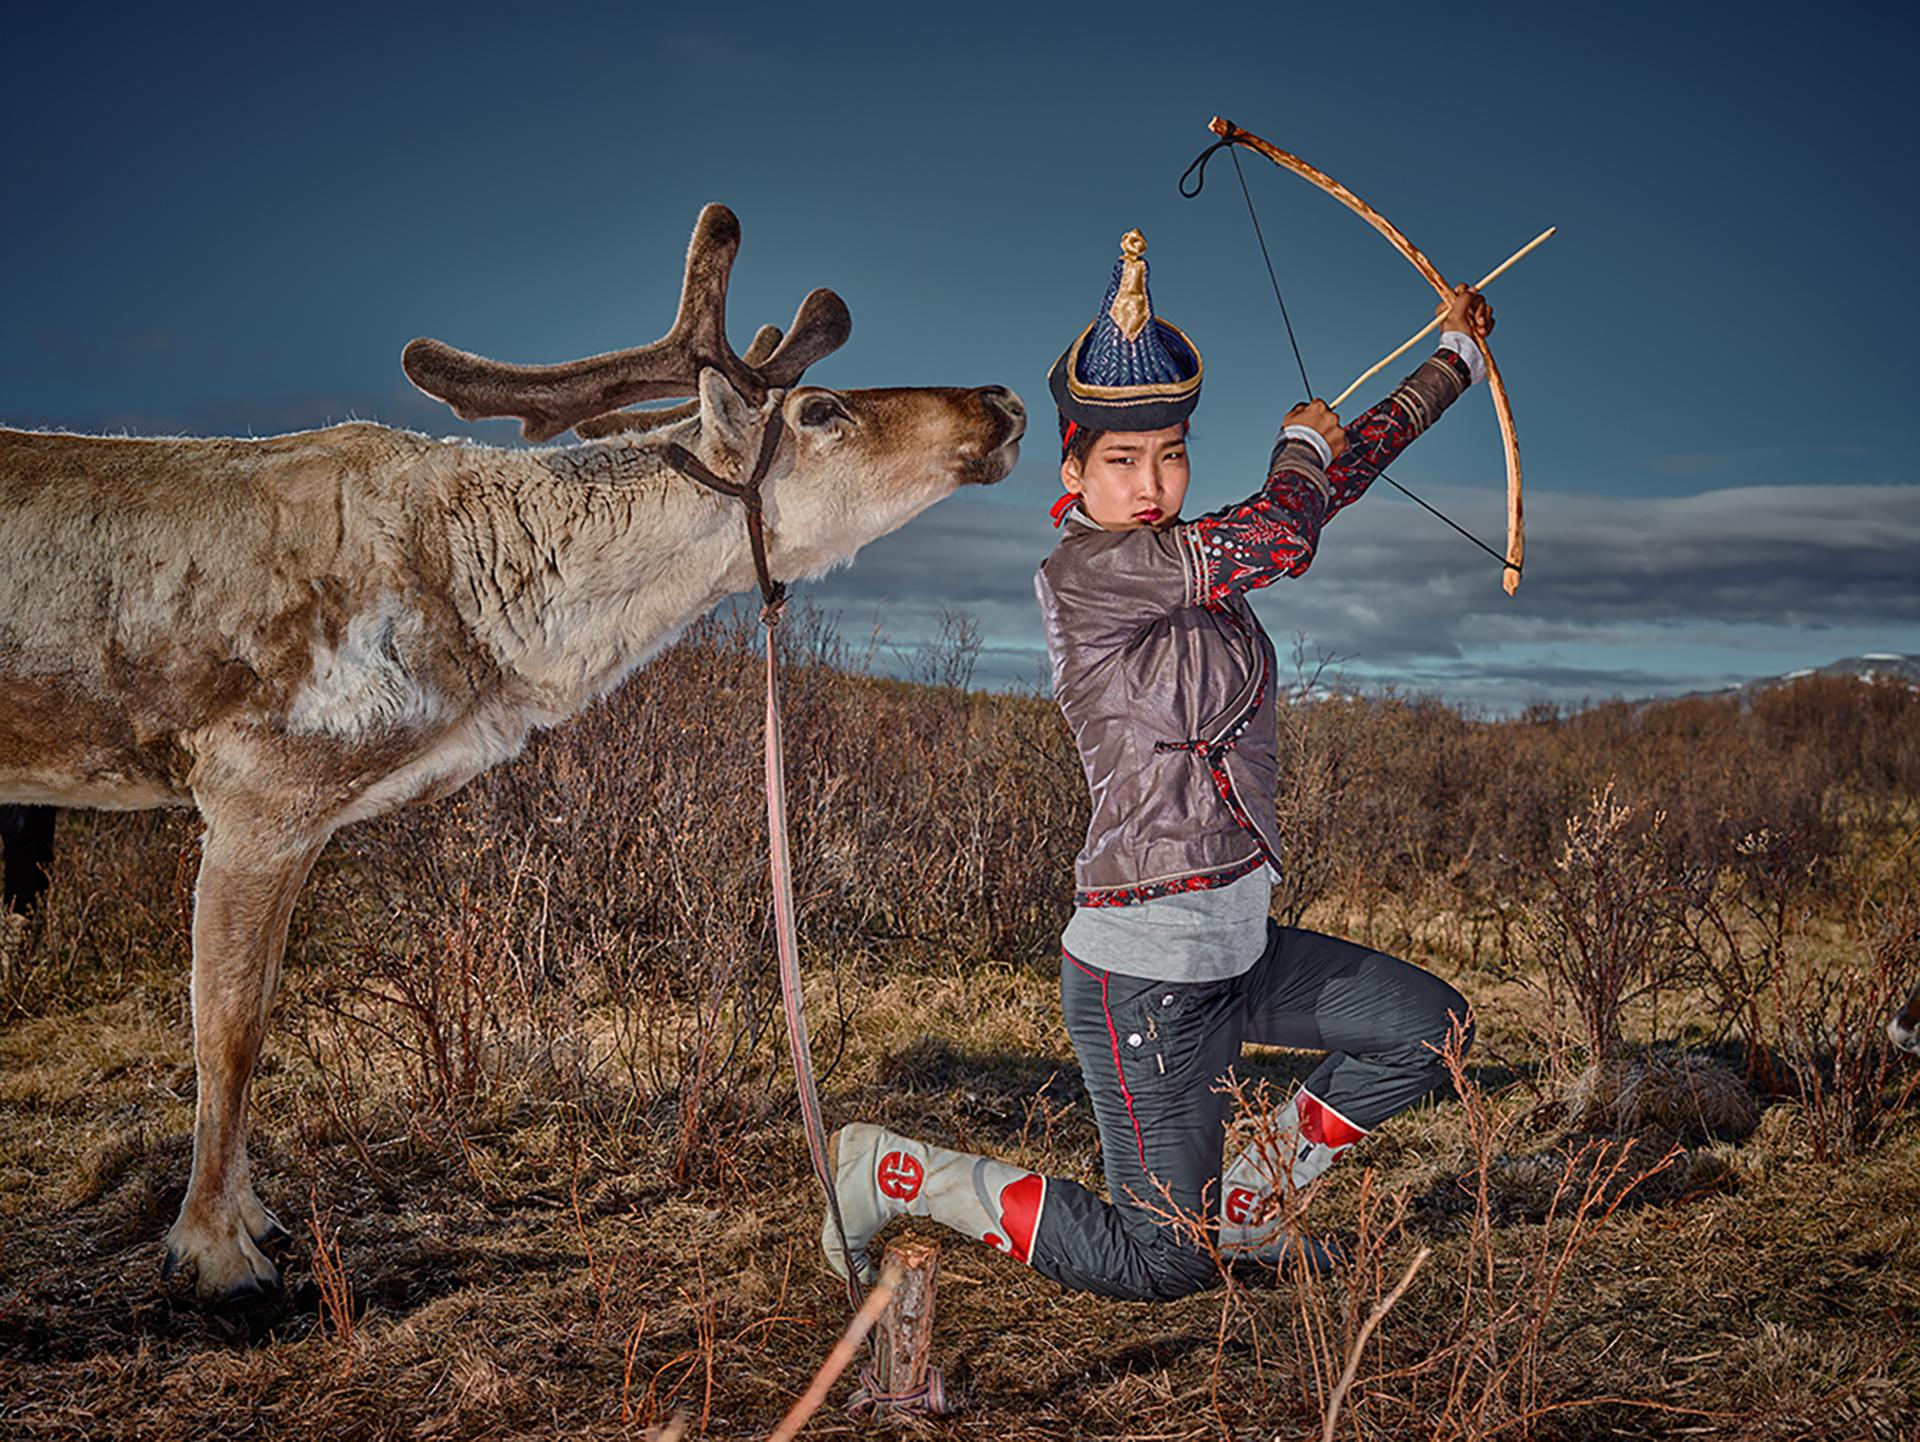 New York Photography Awards Winner - The Bow and Arrow Lady